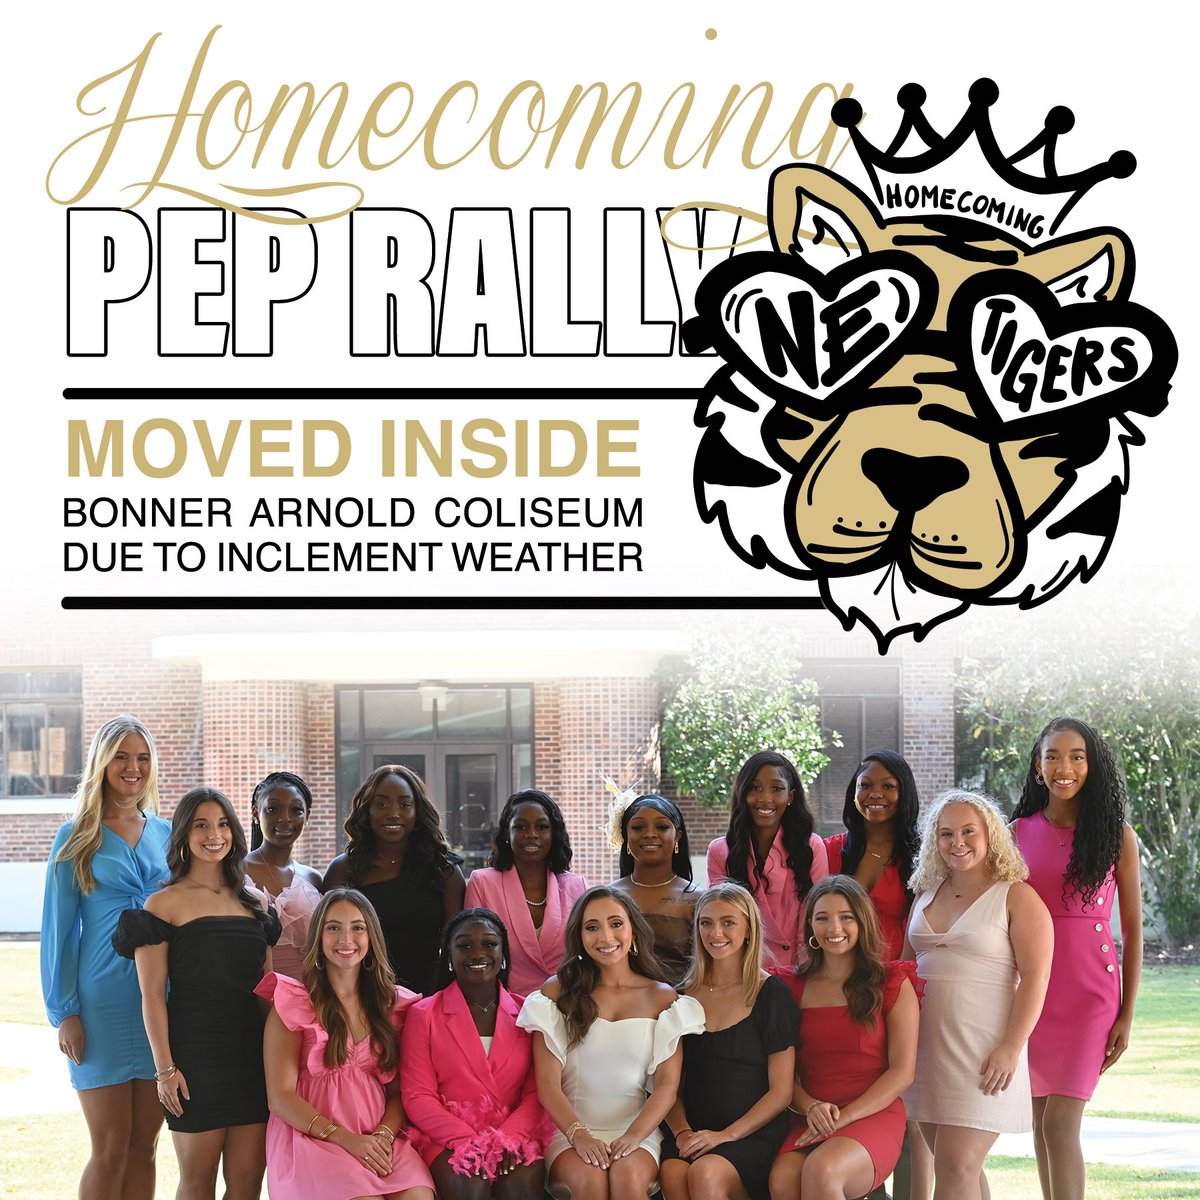 LOCATION CHANGED! Due to rain, the NEMCC Homecoming pep rally has been moved to Bonner Arnold Coliseum! The pep rally will kick off at 12:10. #movingforward